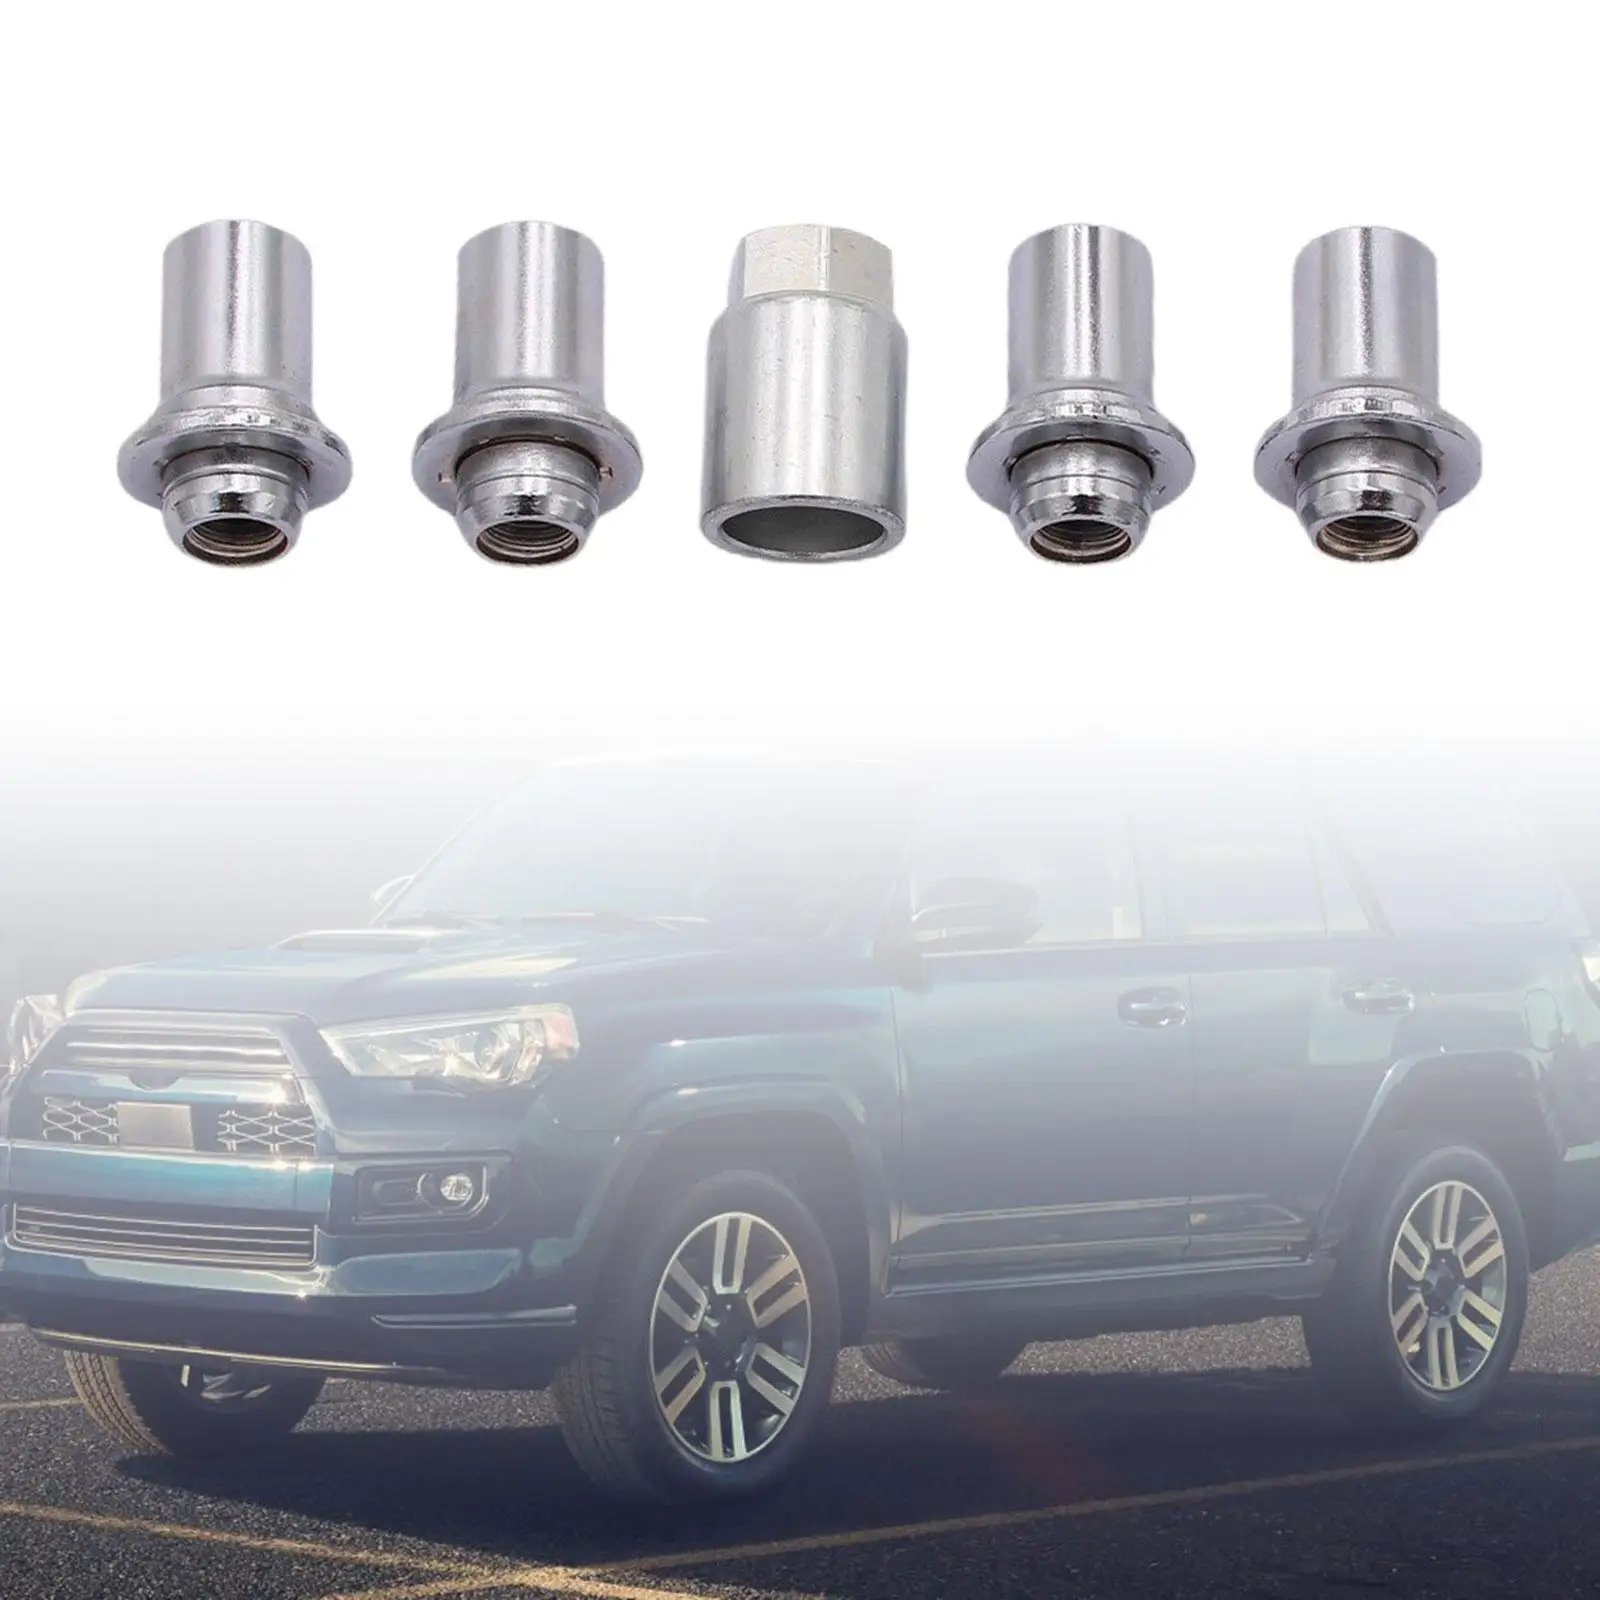 Wheel Lock Set 00276-00901 Accessory Professional Replaces Spare Parts Assembly Easy to Install Hardware for 4Runner